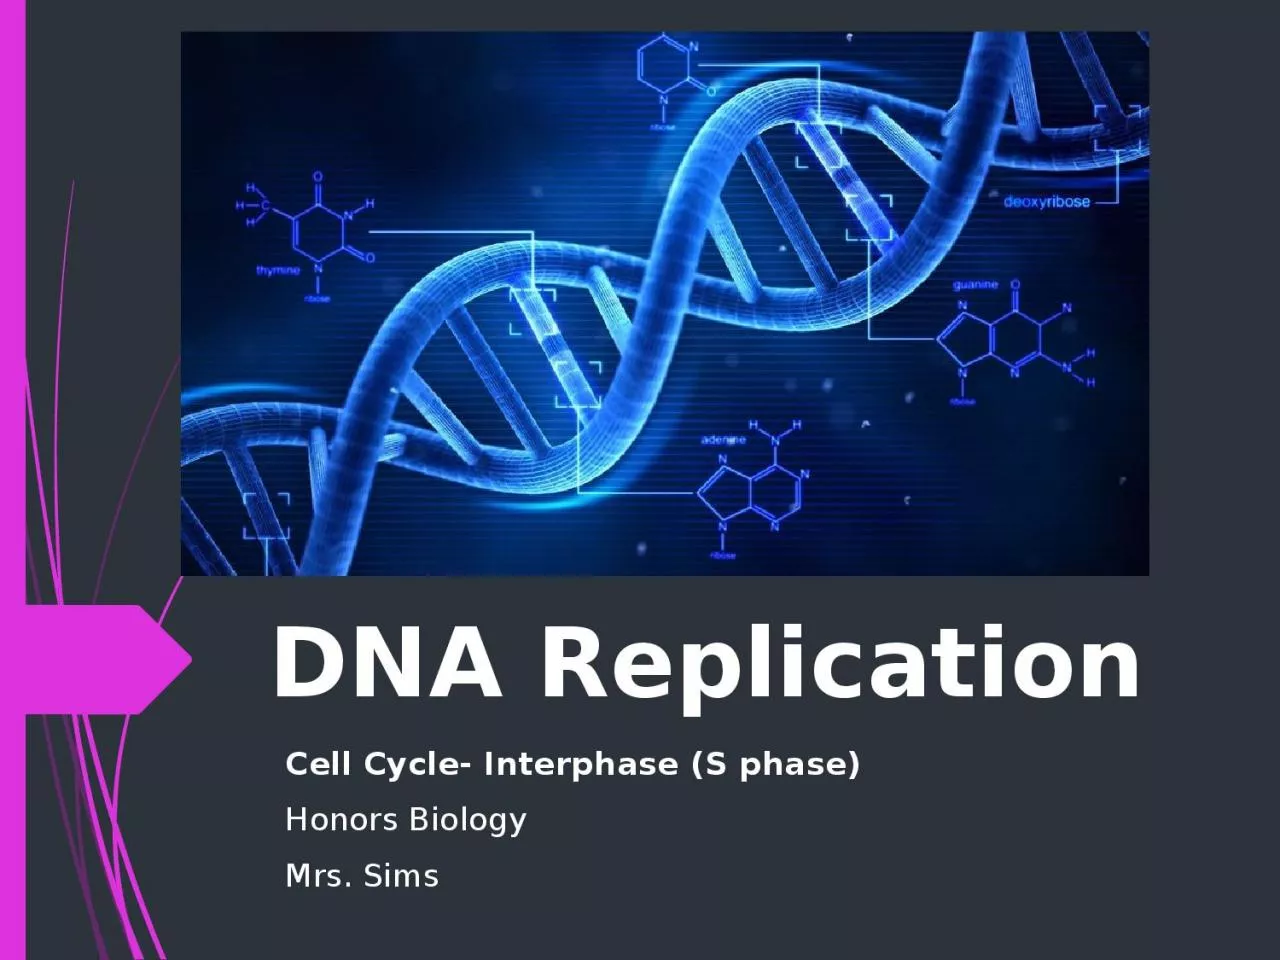 DNA Replication Cell Cycle- Interphase (S phase)